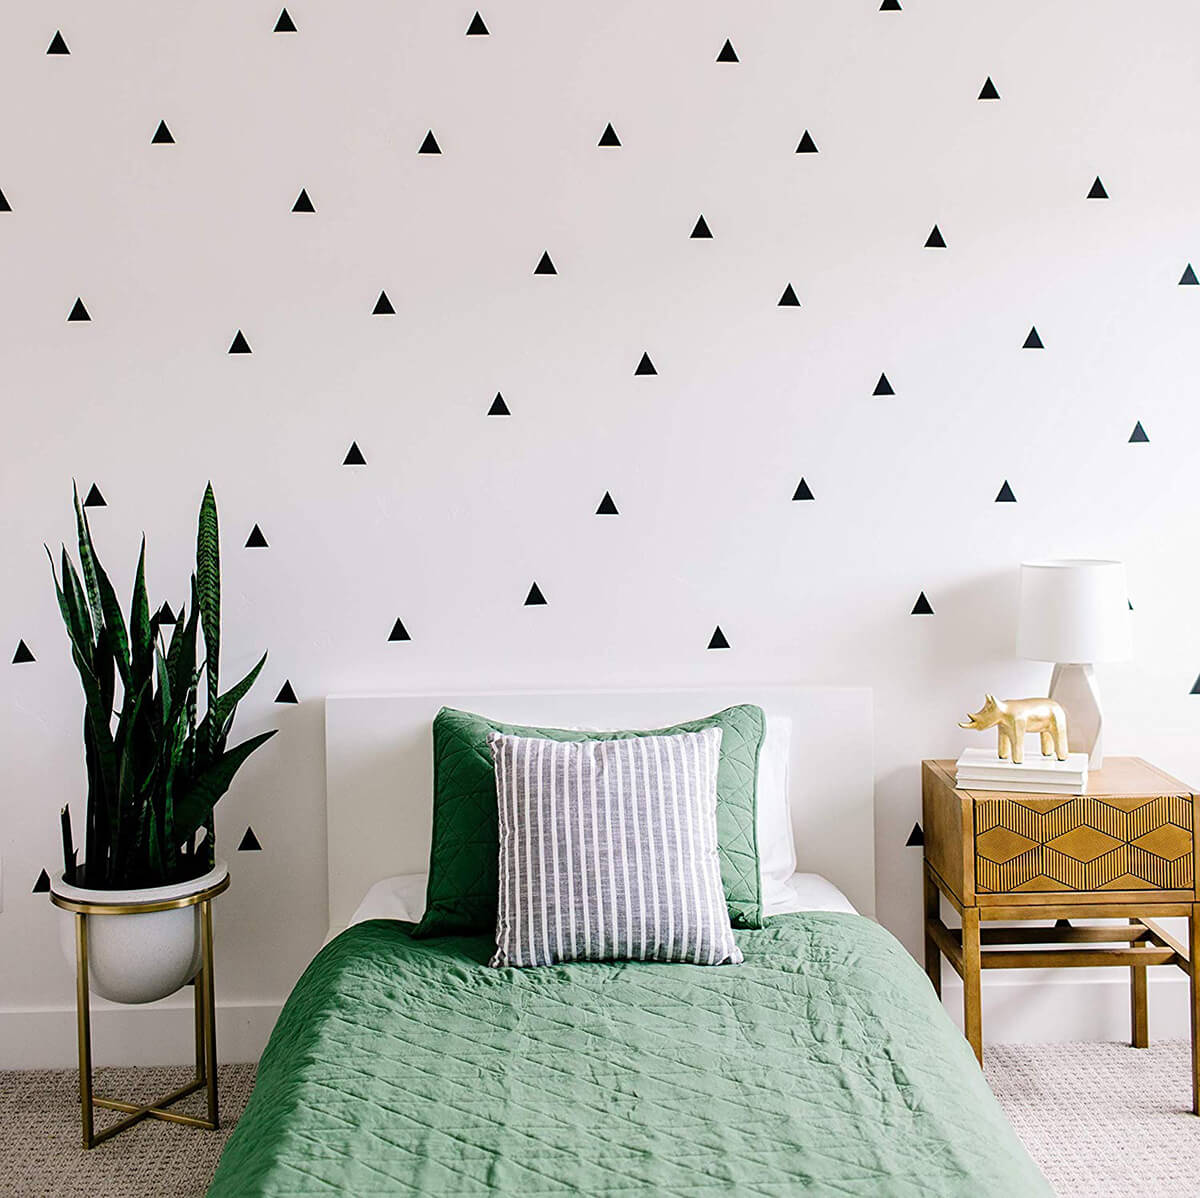 22 Best Bedroom Accent Wall Design Ideas To Update Your Space In 2021